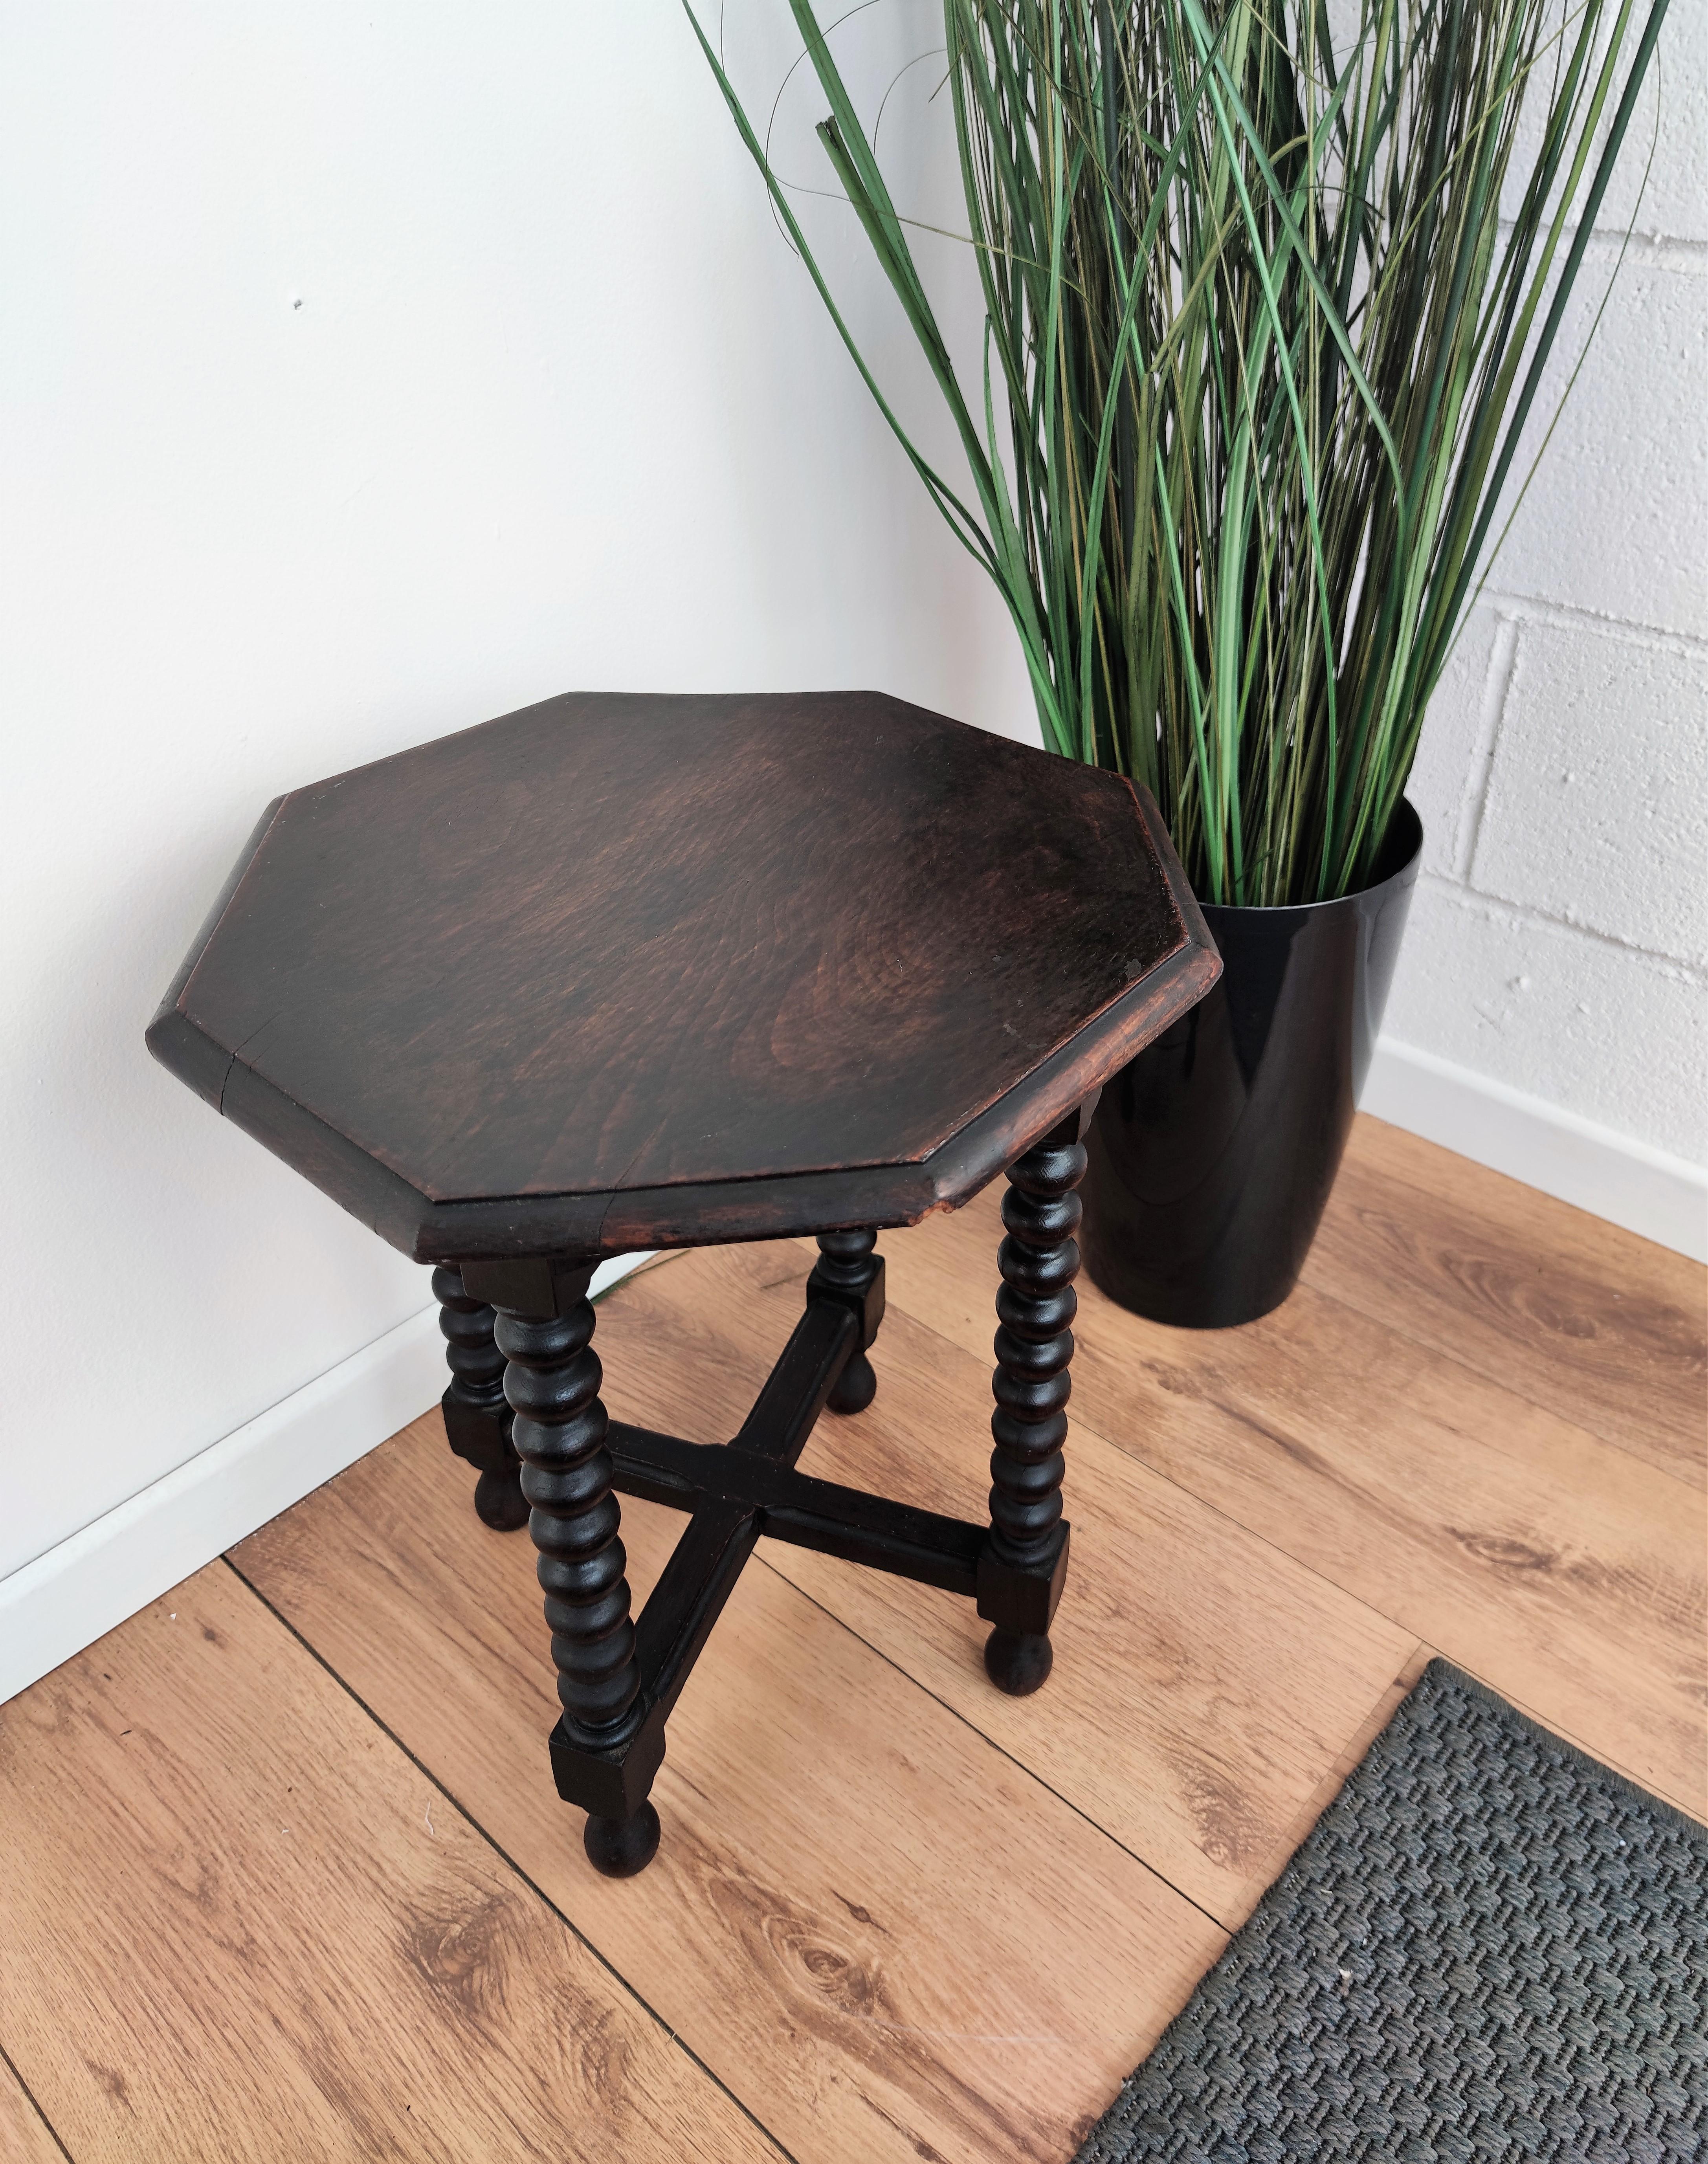 Beautiful antique Italian walnut side table or stool features octagonal top with beveled edges over four beautifully bobbin turned legs, connected to one another with cross-shaped central stretcher. This Italian walnut stool or side table with the